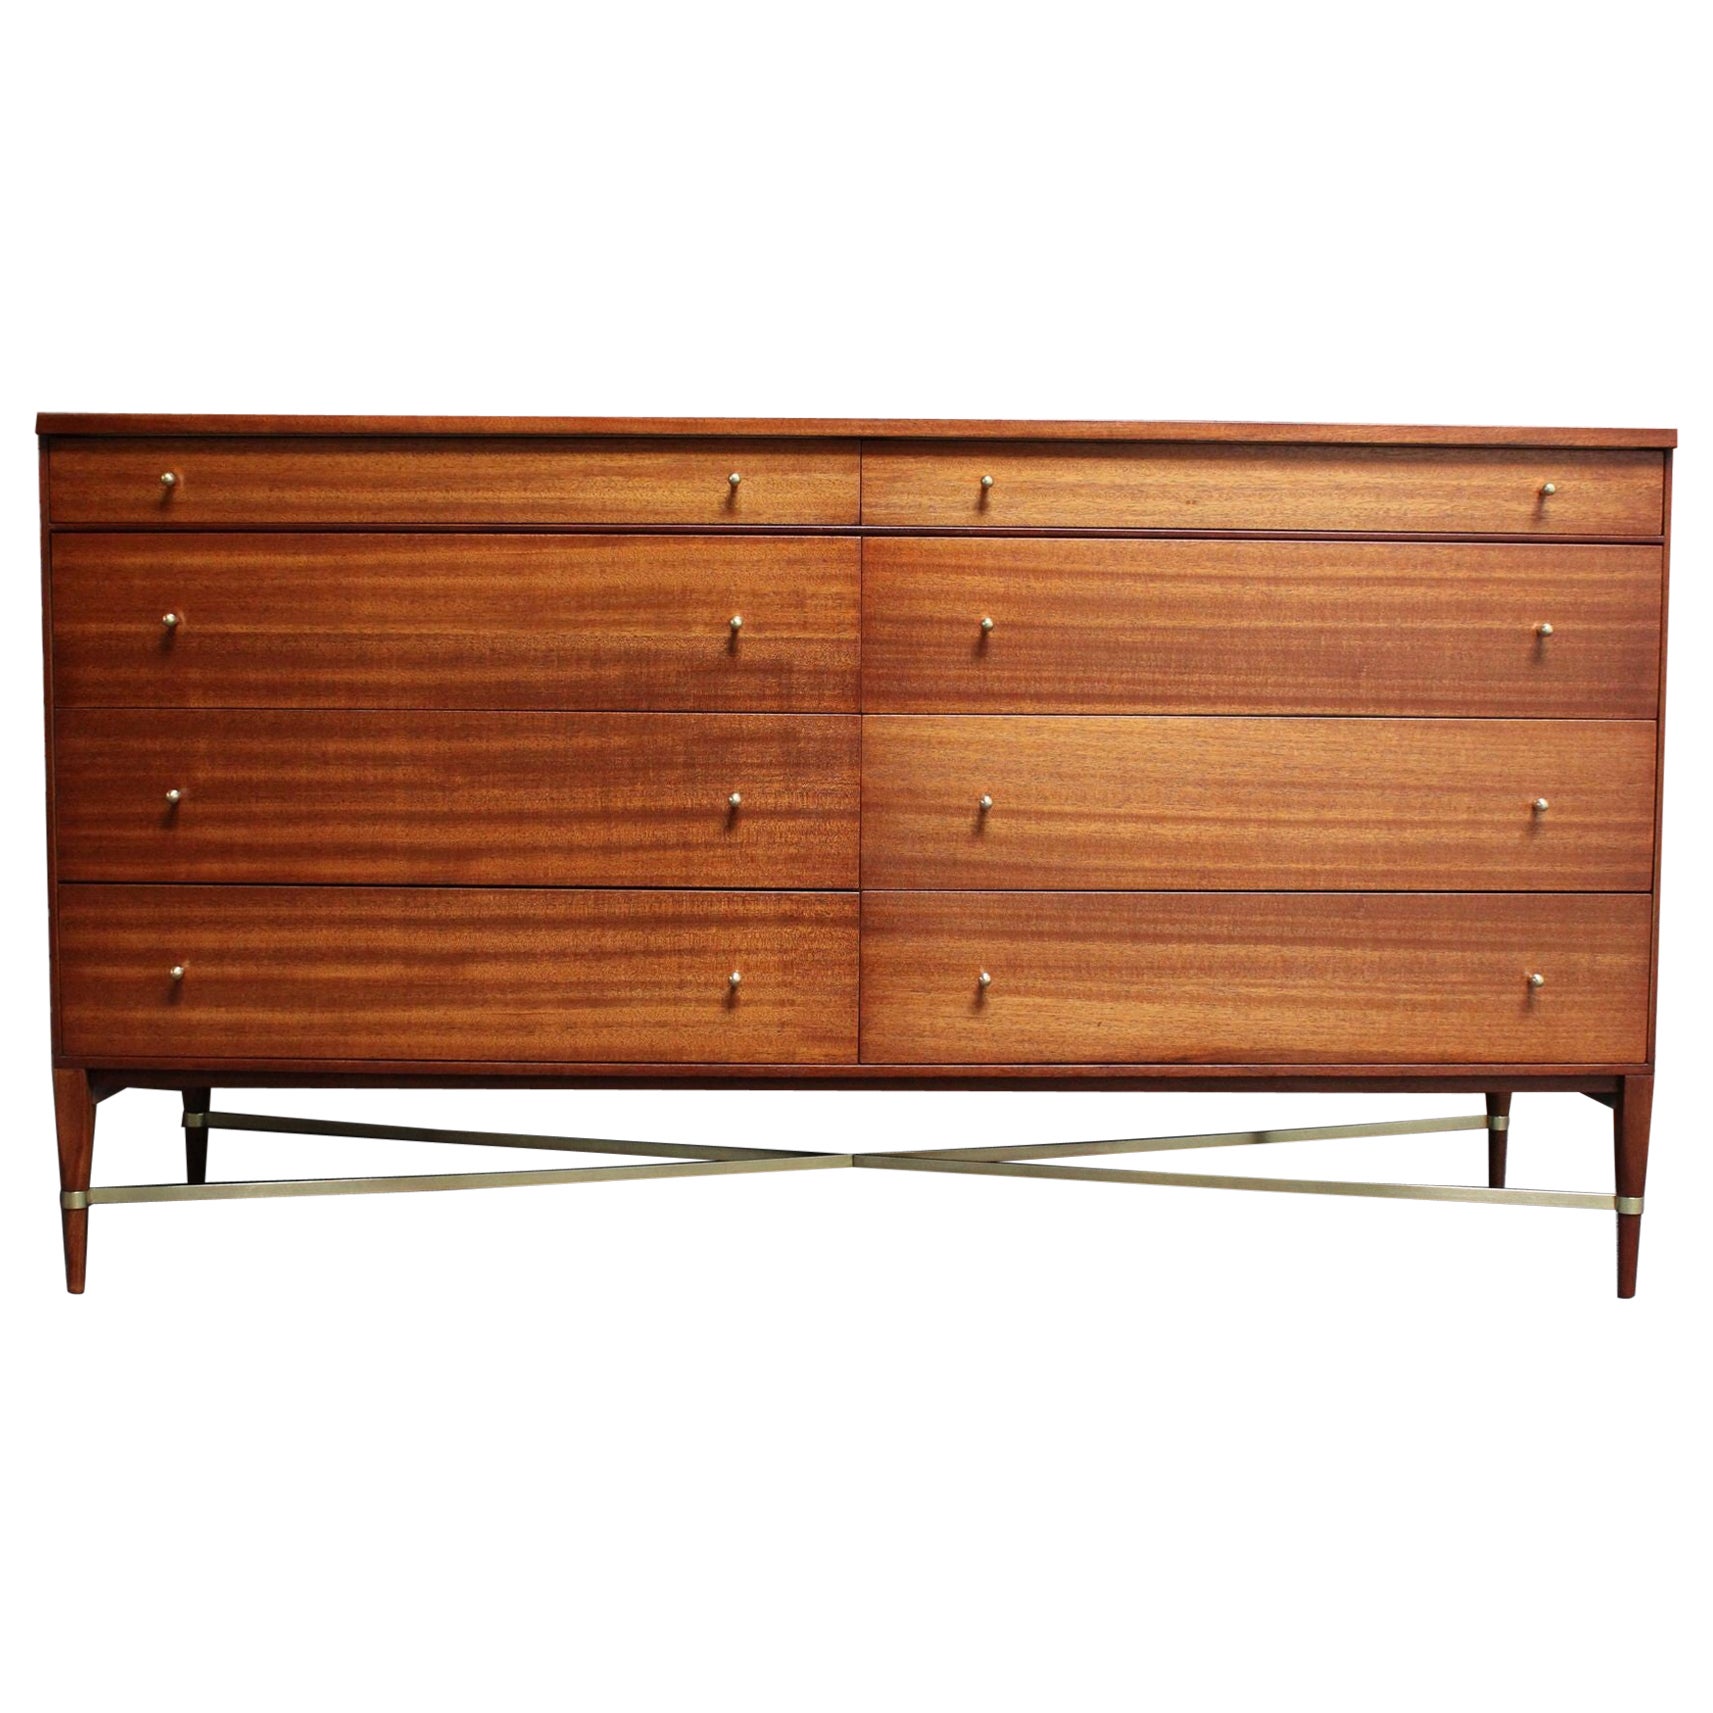 Paul Mccobb Calvin Group Mahogany and Brass Double Dresser / Chest of Drawers For Sale